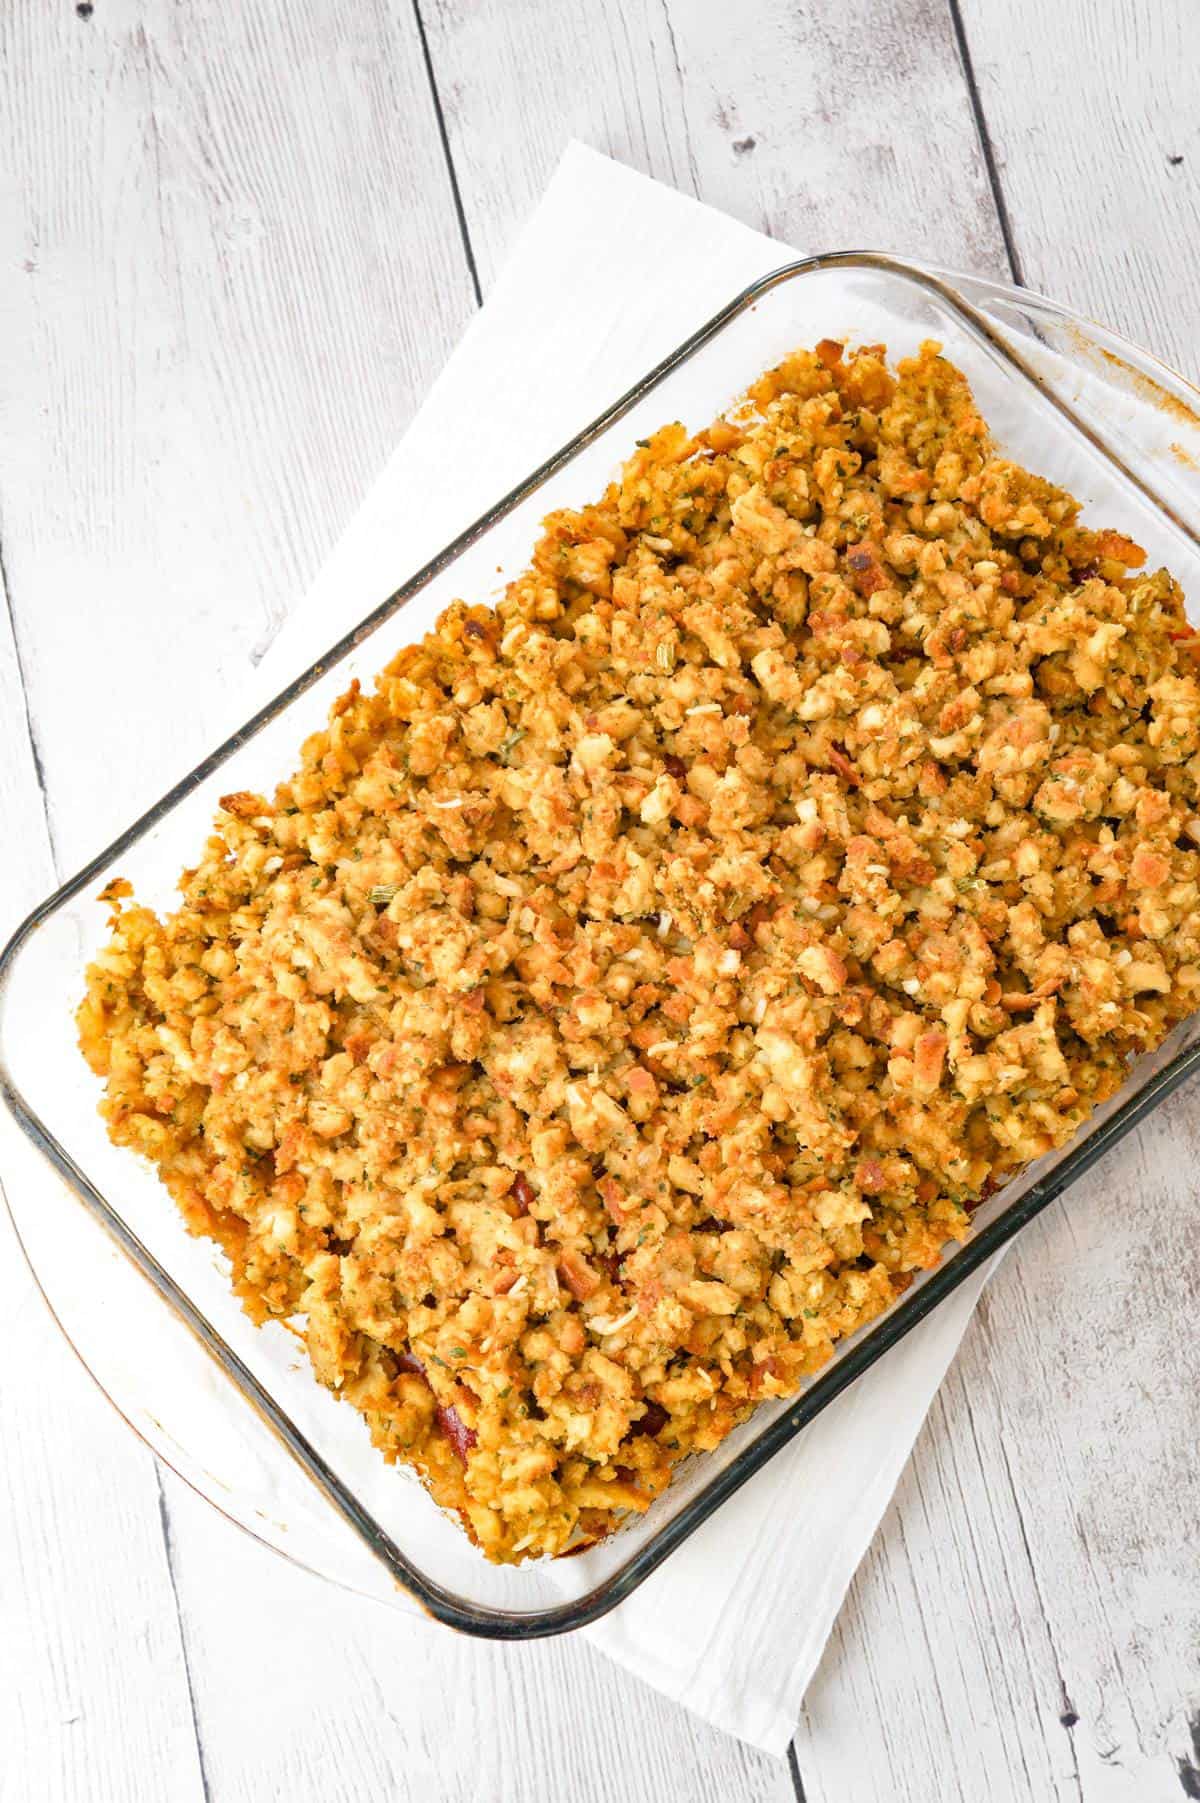 Meatloaf and Stuffing Casserole is an easy ground beef dinner recipe with a meatloaf base topped with stove top stuffing.